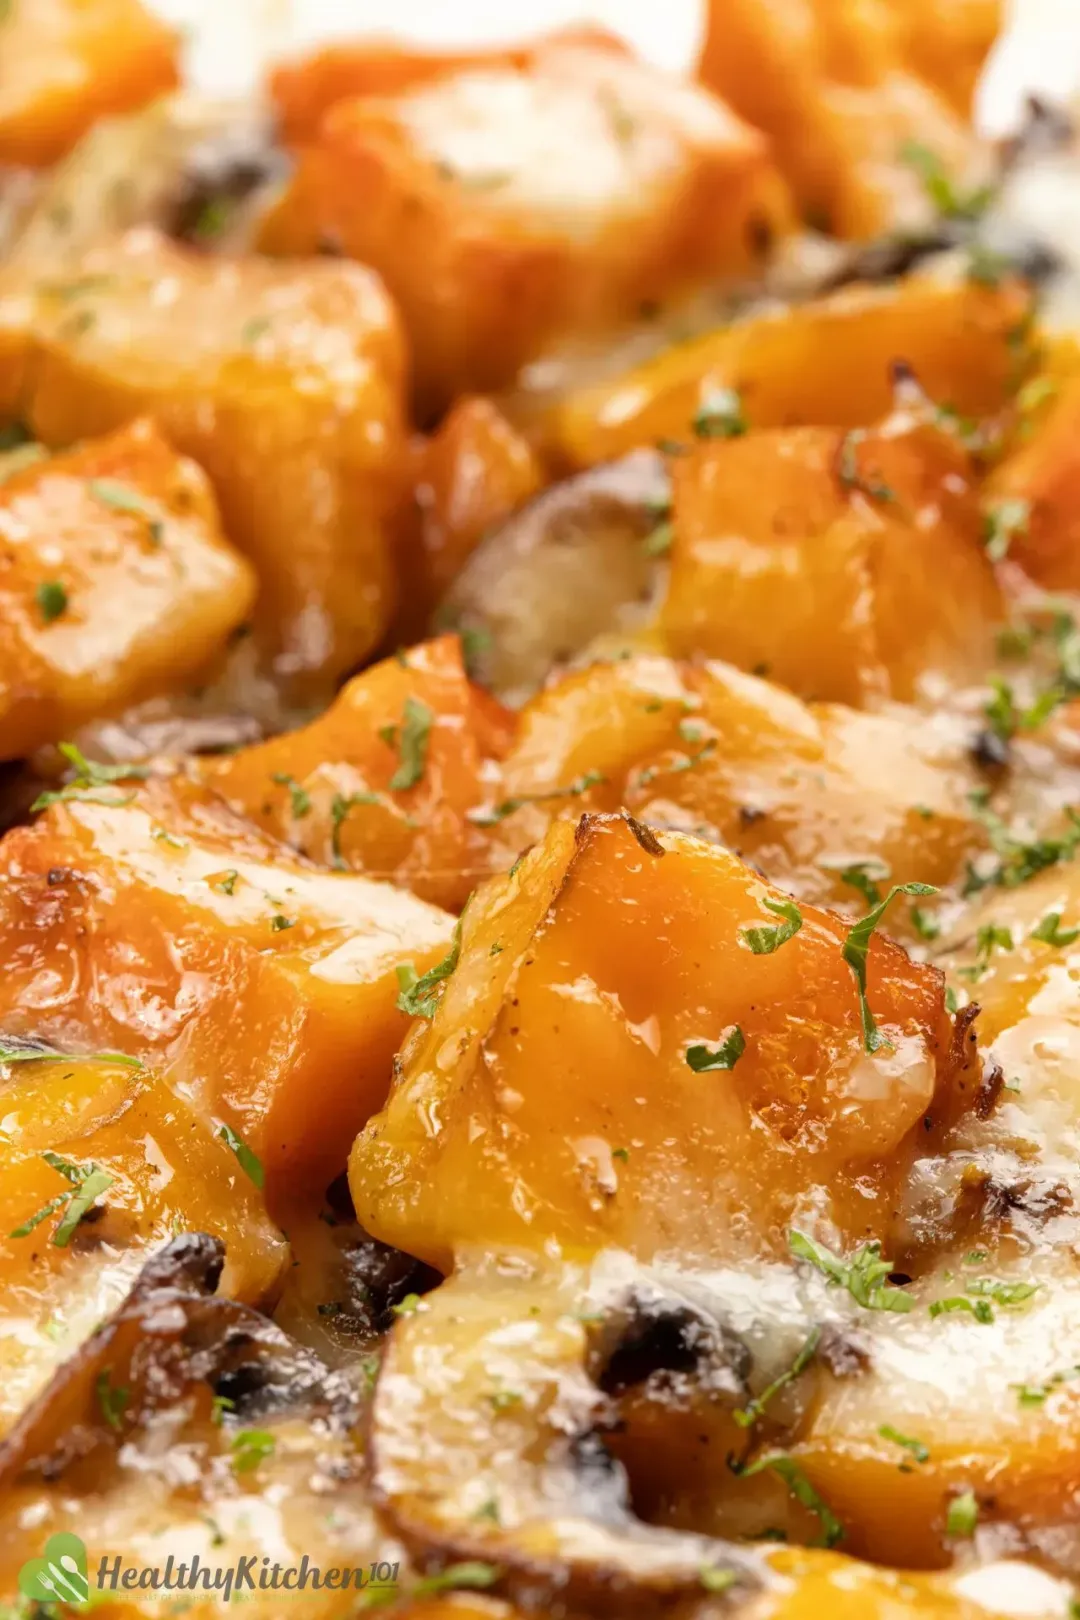 A close-up shot of butternut squash casserole with crispy edges and freckled with parsley specks